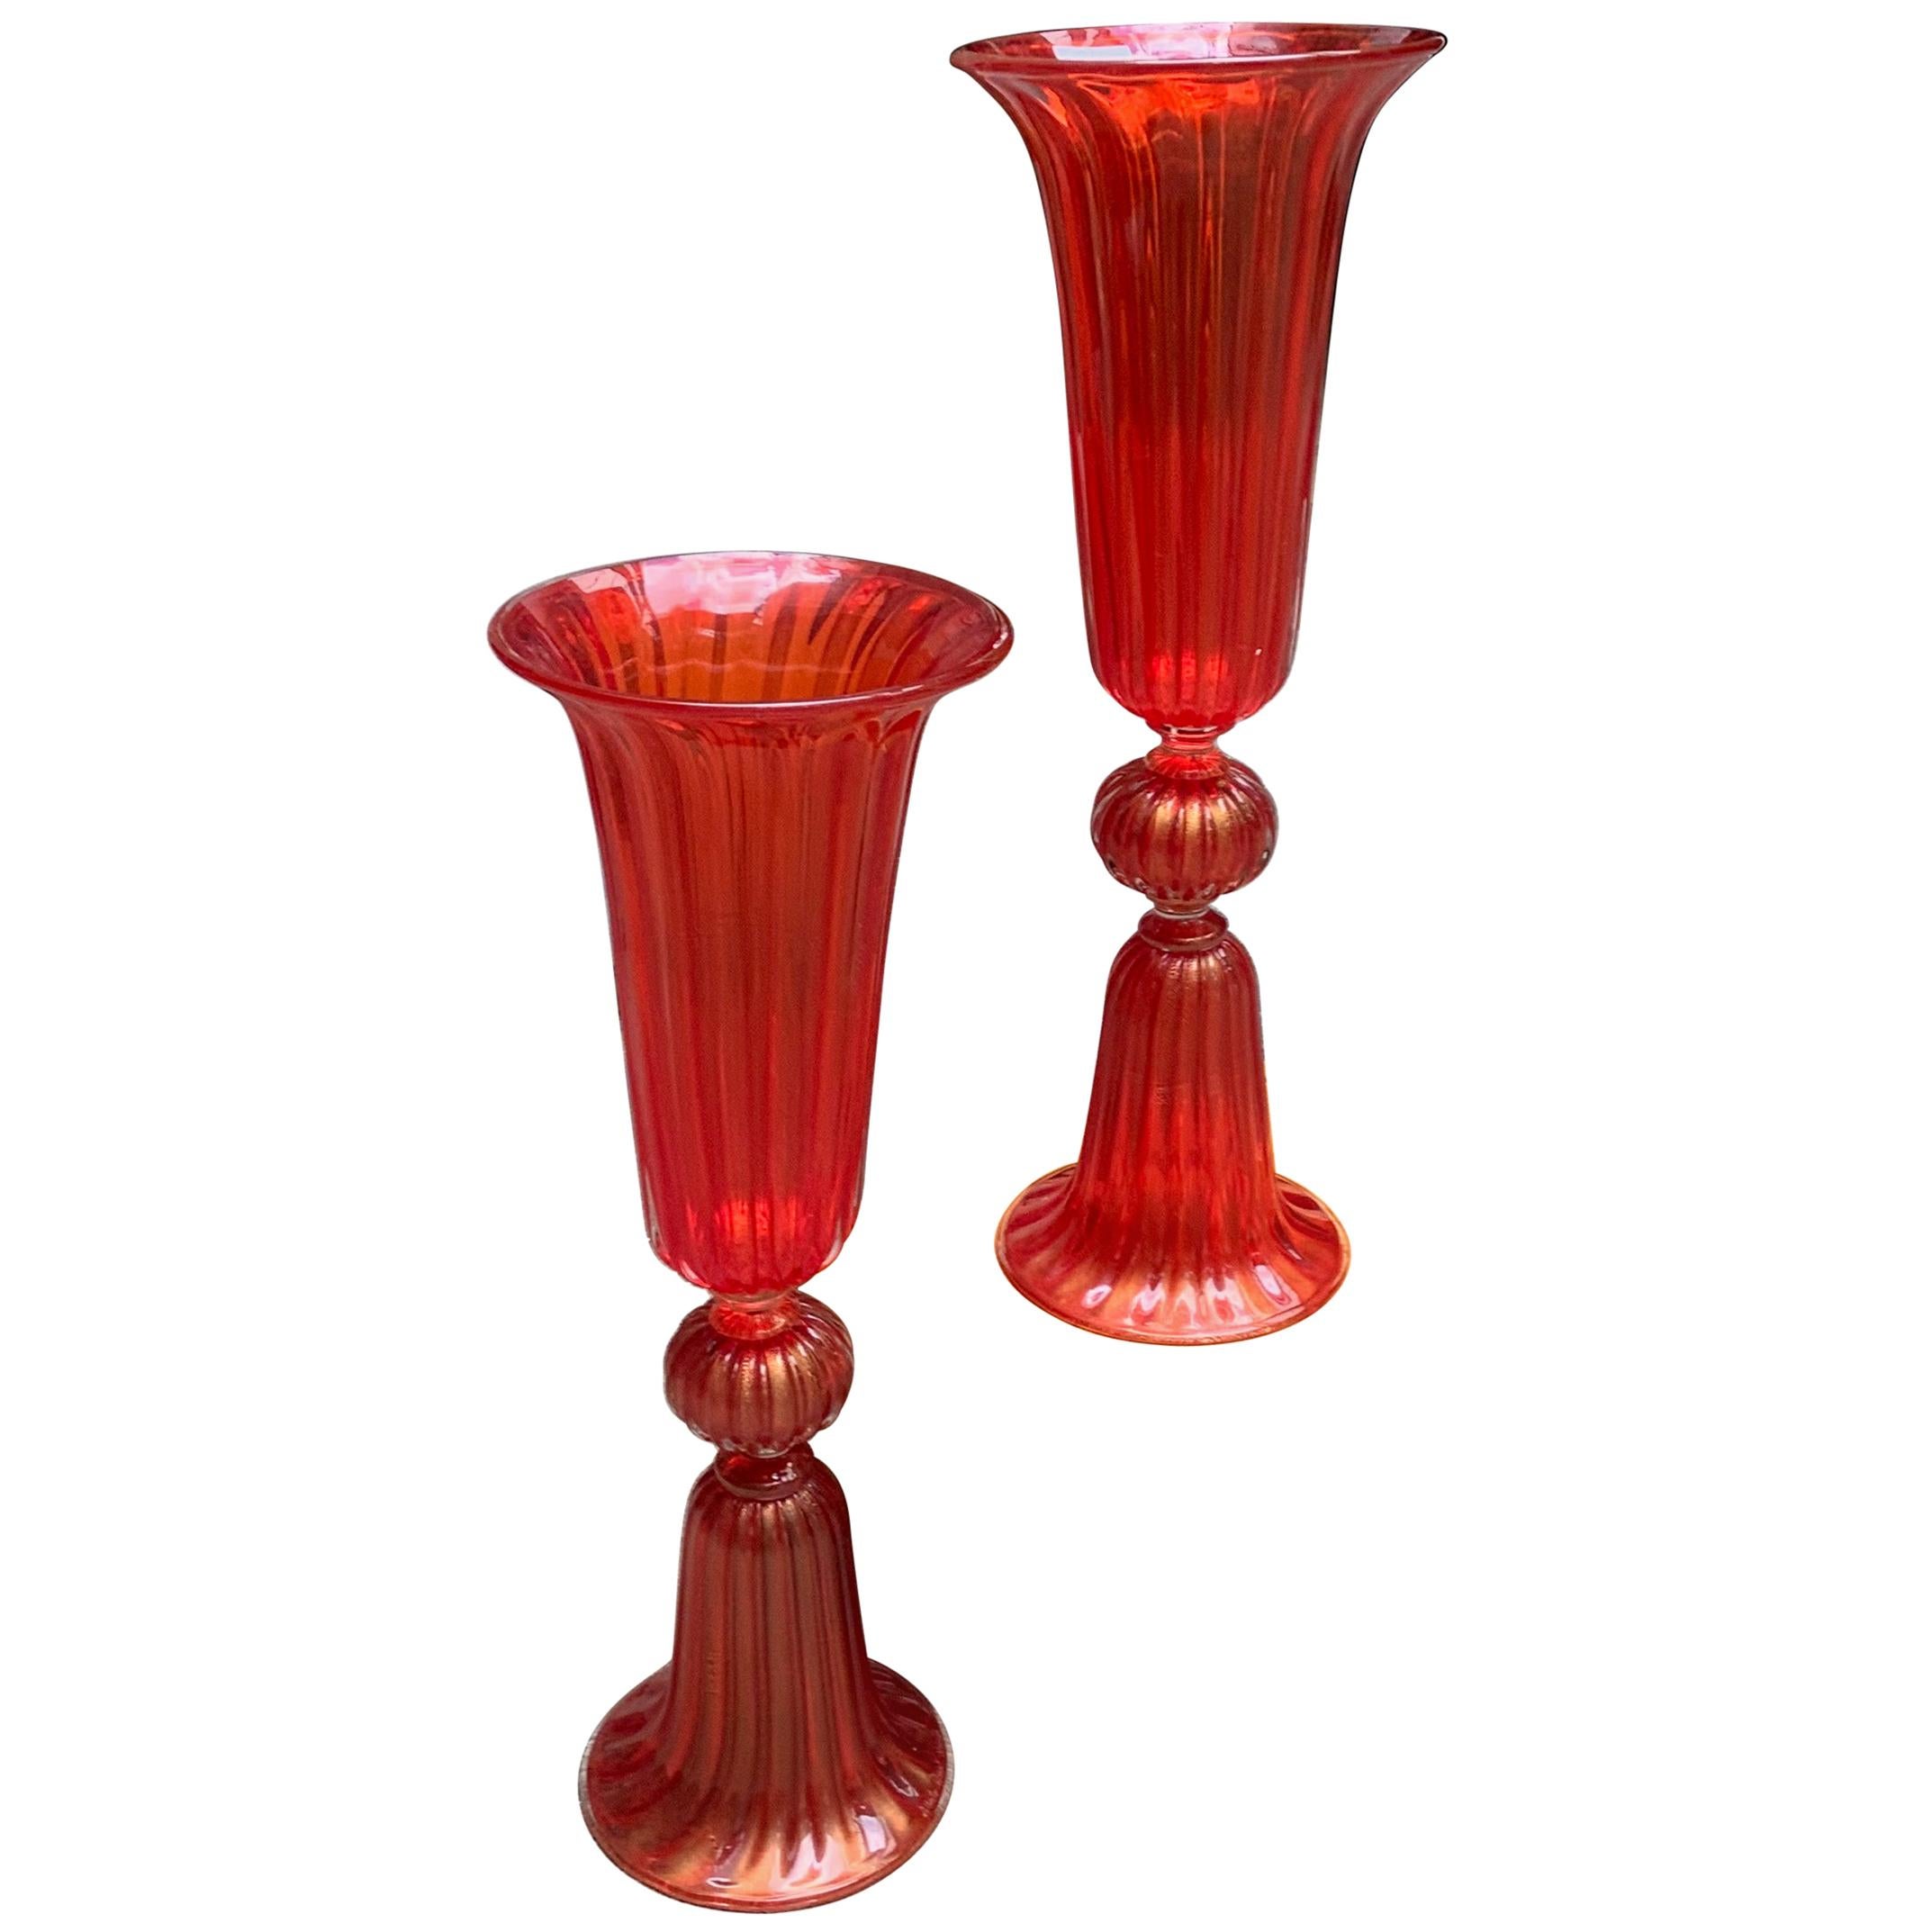 Pair of Vases in Murano Glass Signed "A Dona"